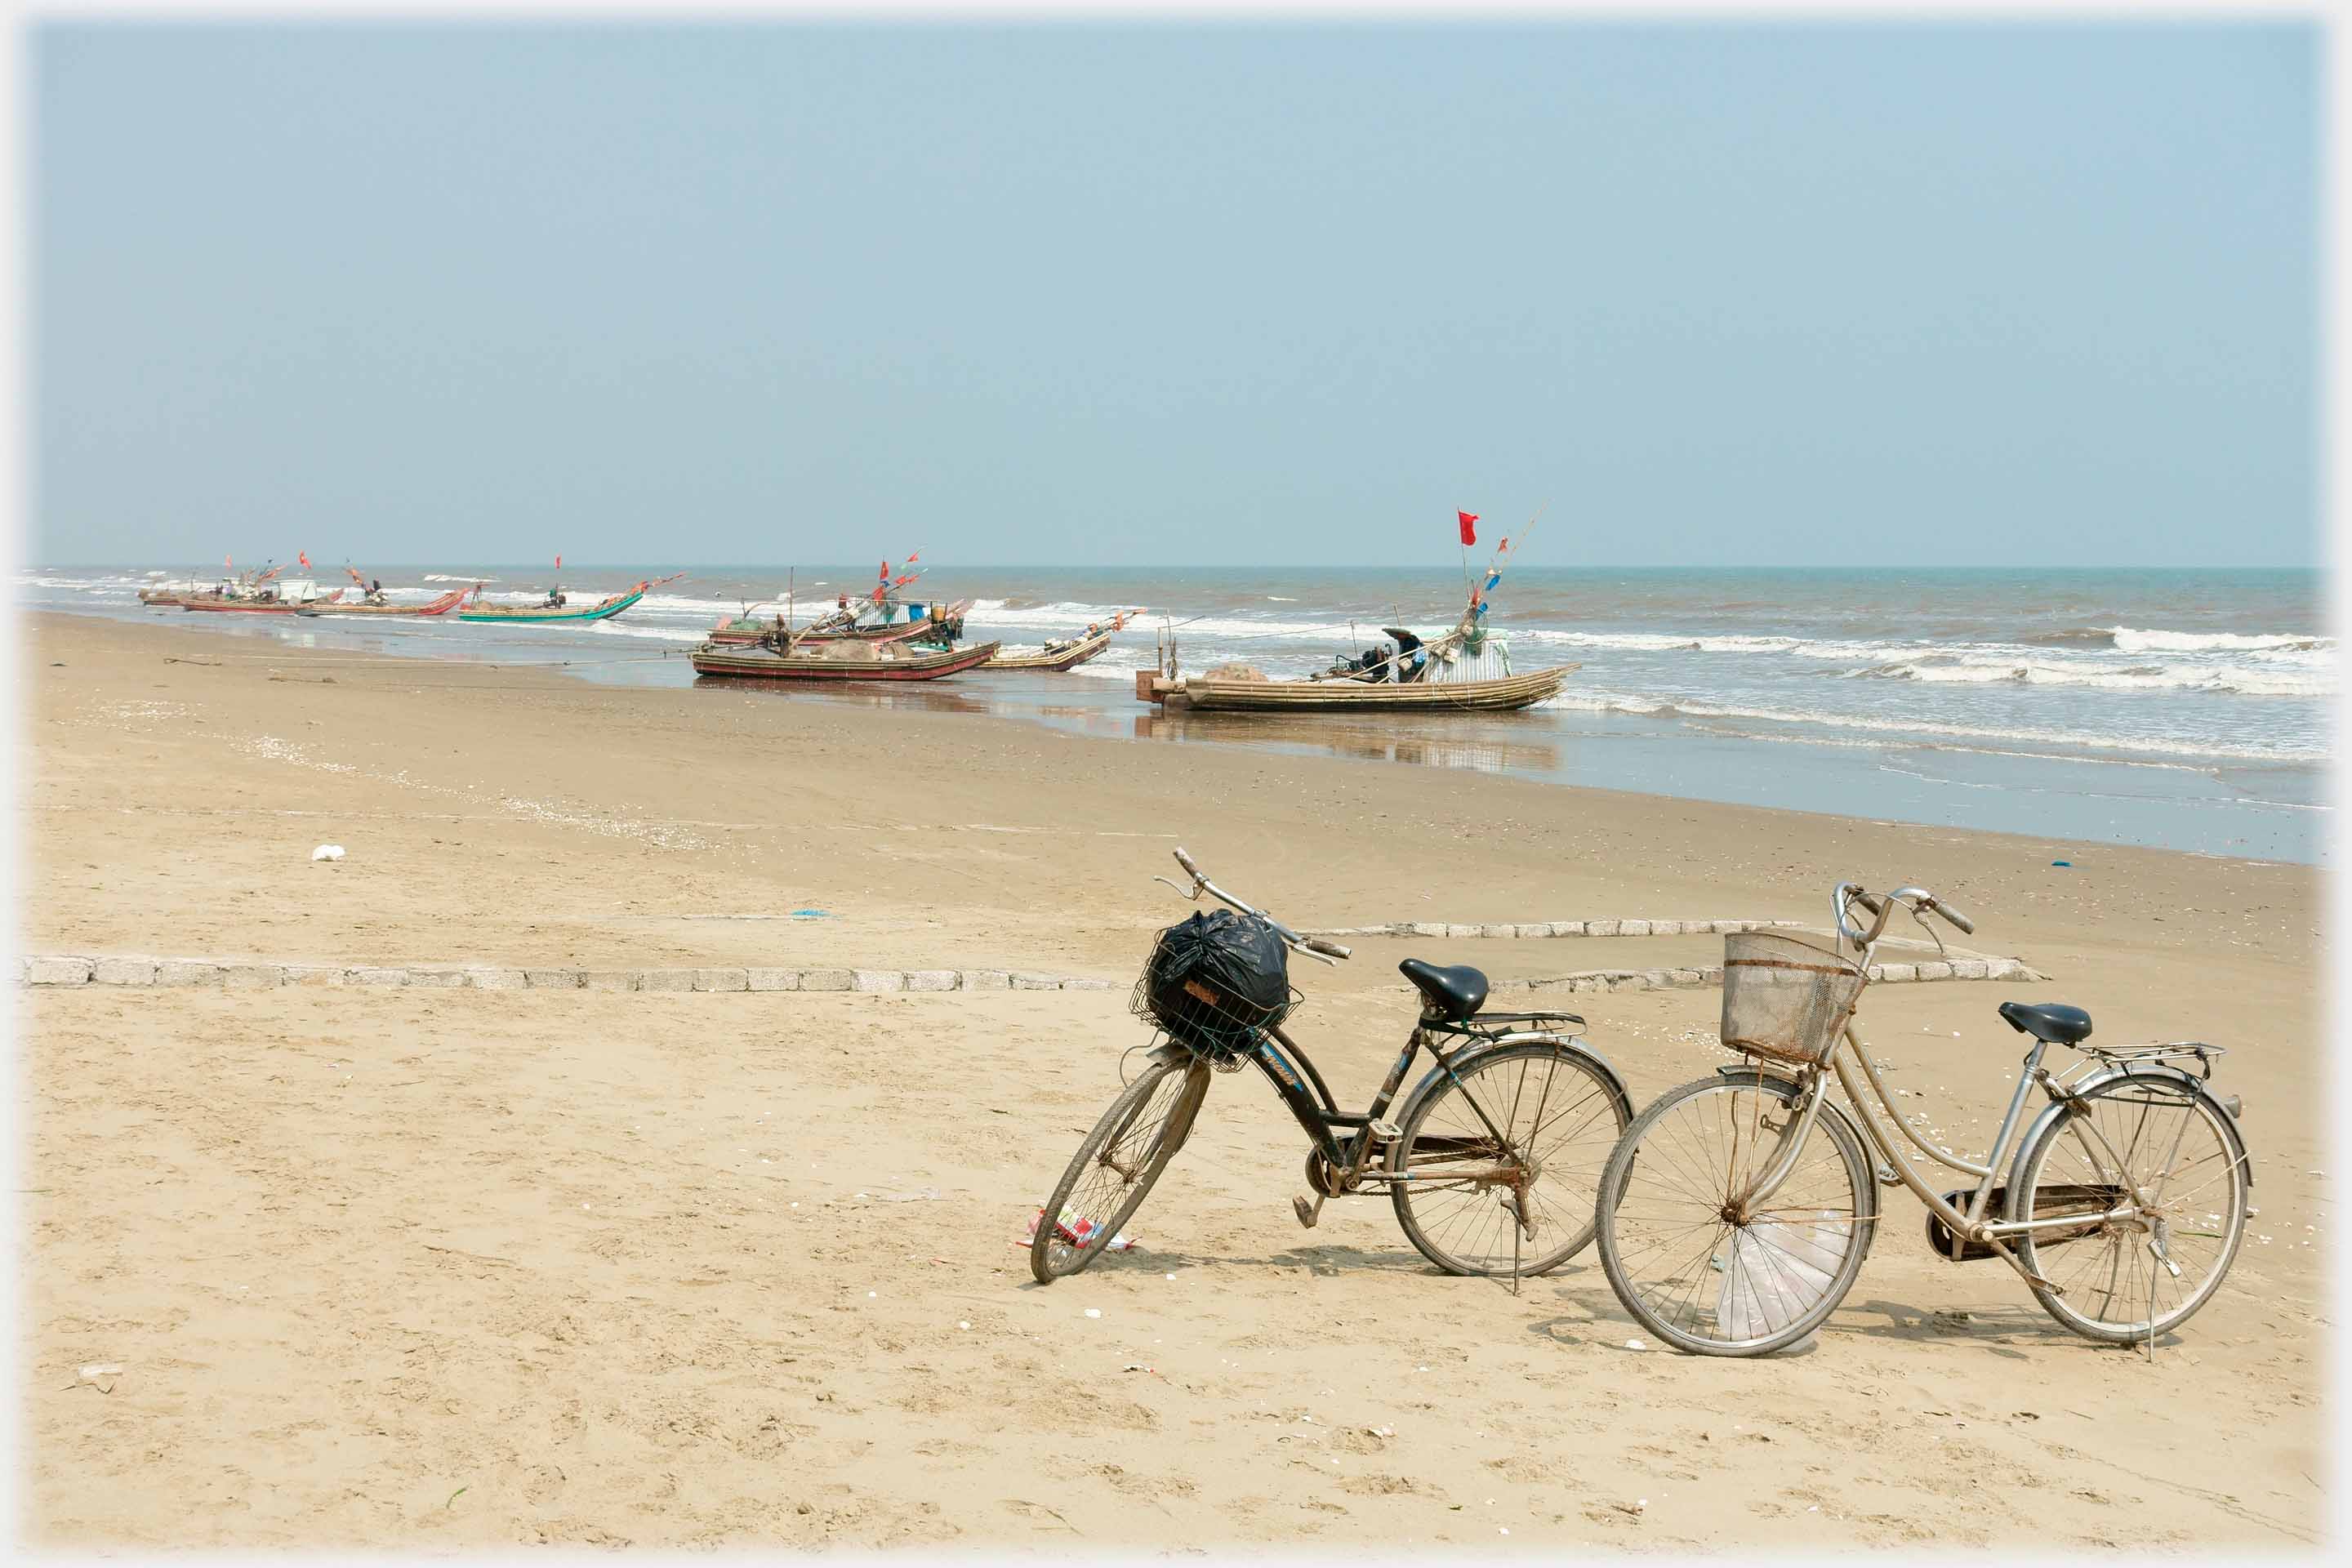 Two cycles parked on the beach, beached boats in the background.